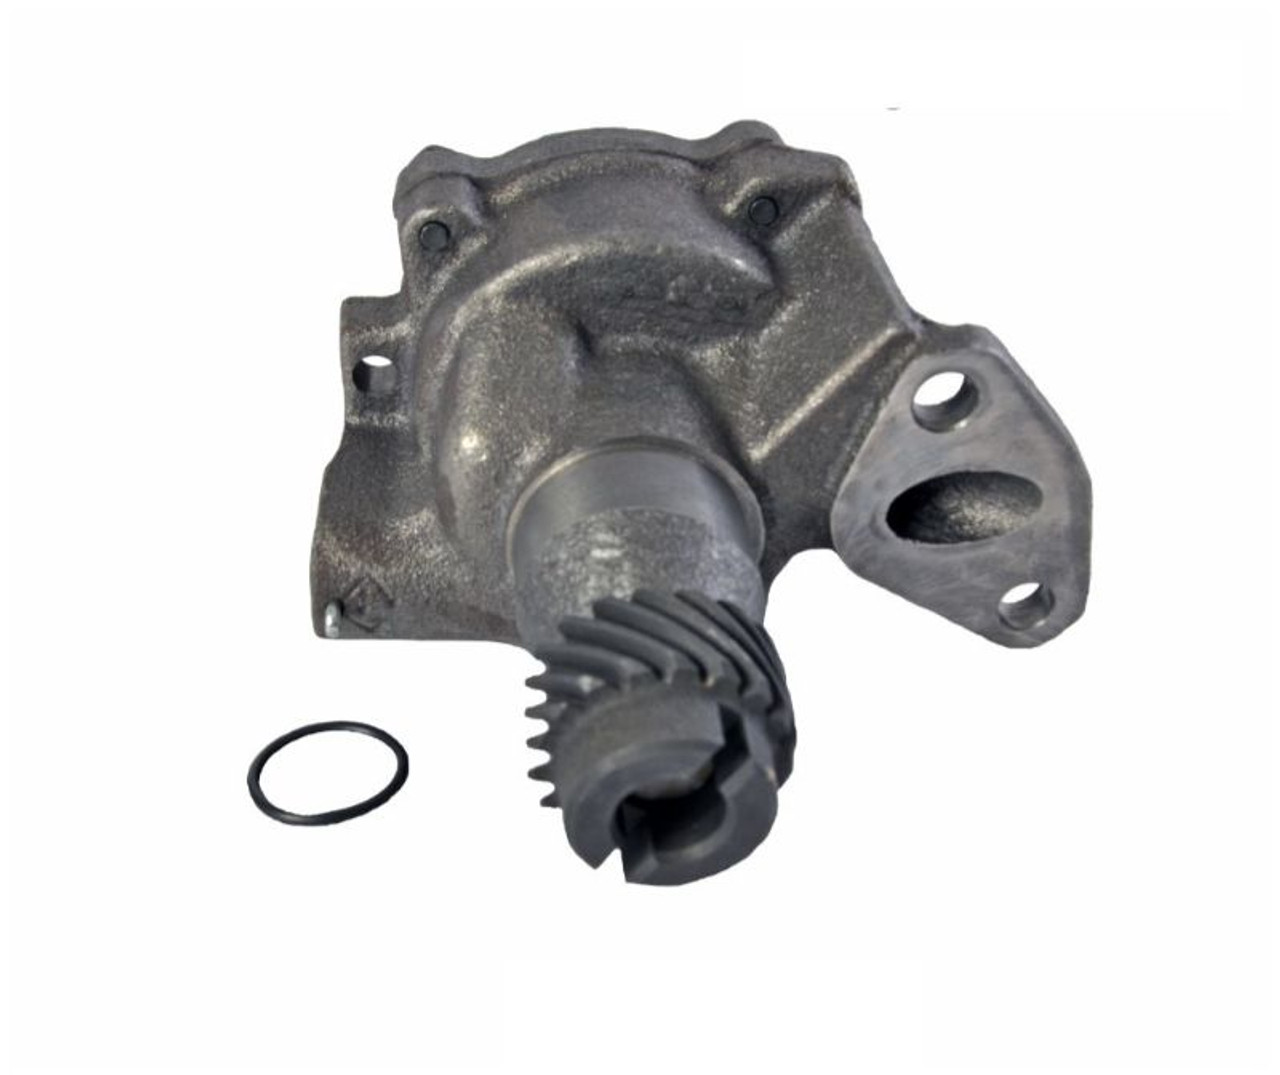 Oil Pump - 1988 Plymouth Grand Voyager 2.5L (EP118.K196)